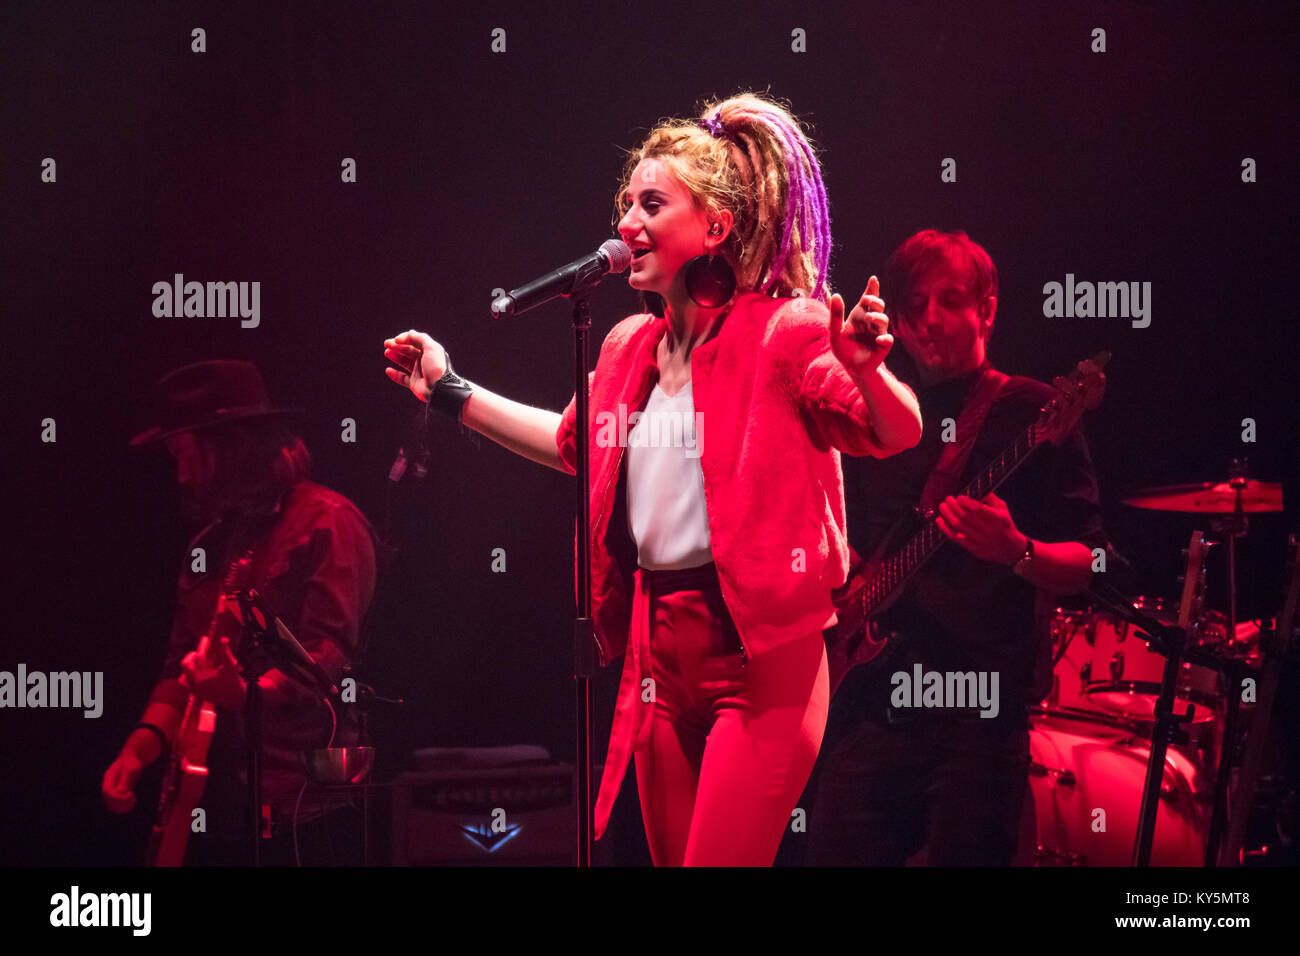 Wetzlar, Germany. 12th Jan, 2018. Natia Todua, Georgian-born singer and winner of German TV-talent-show 'The Voice of Germany 2017', is performing at concert show 'The Voice of Germany - Live in concert' in Rittal-Arena, Wetzlar, Germany. Natia Todua is confirmed as a contestant in Unser Lied für Lissabon, the German national selection for the Eurovision Song Contest 2018. Credit: Christian Lademann Stock Photo